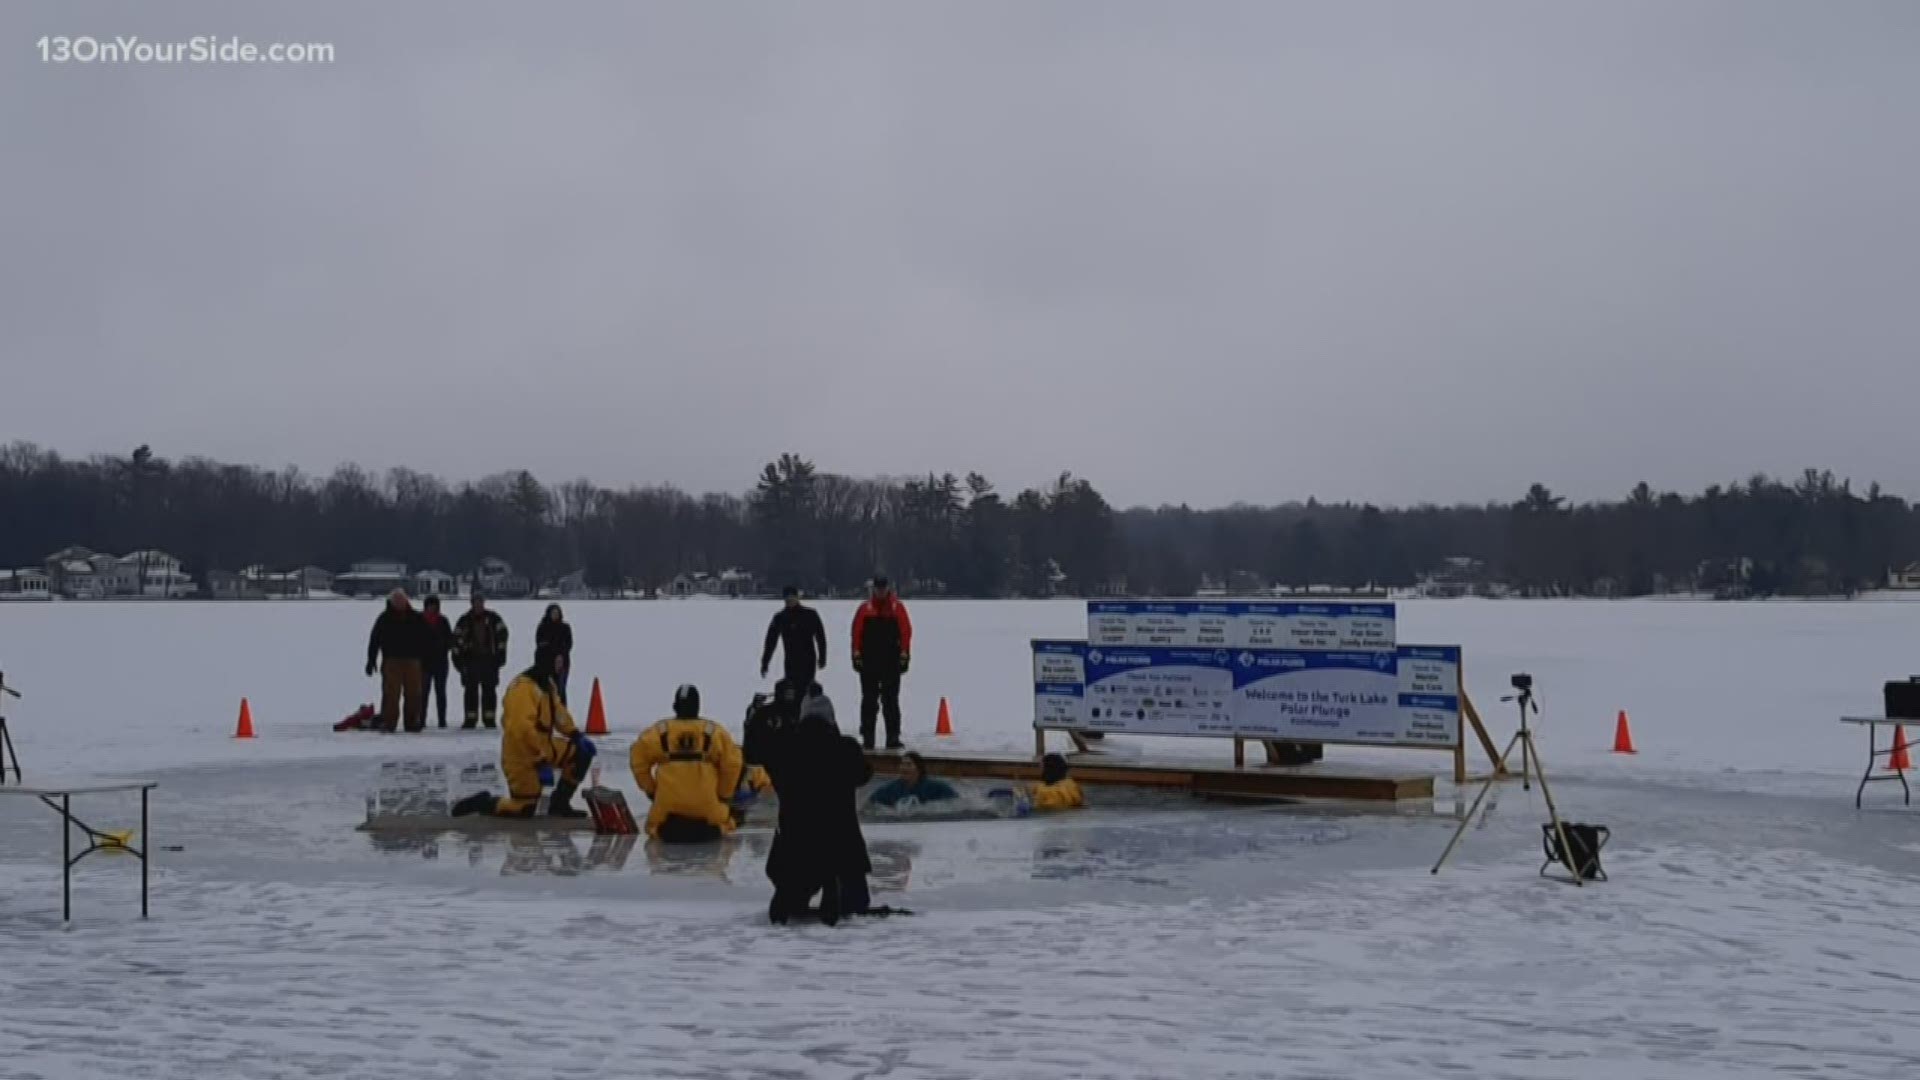 The fundraising goal for the plunge was $40,000. At last count, the plunge raised more than $58,000.